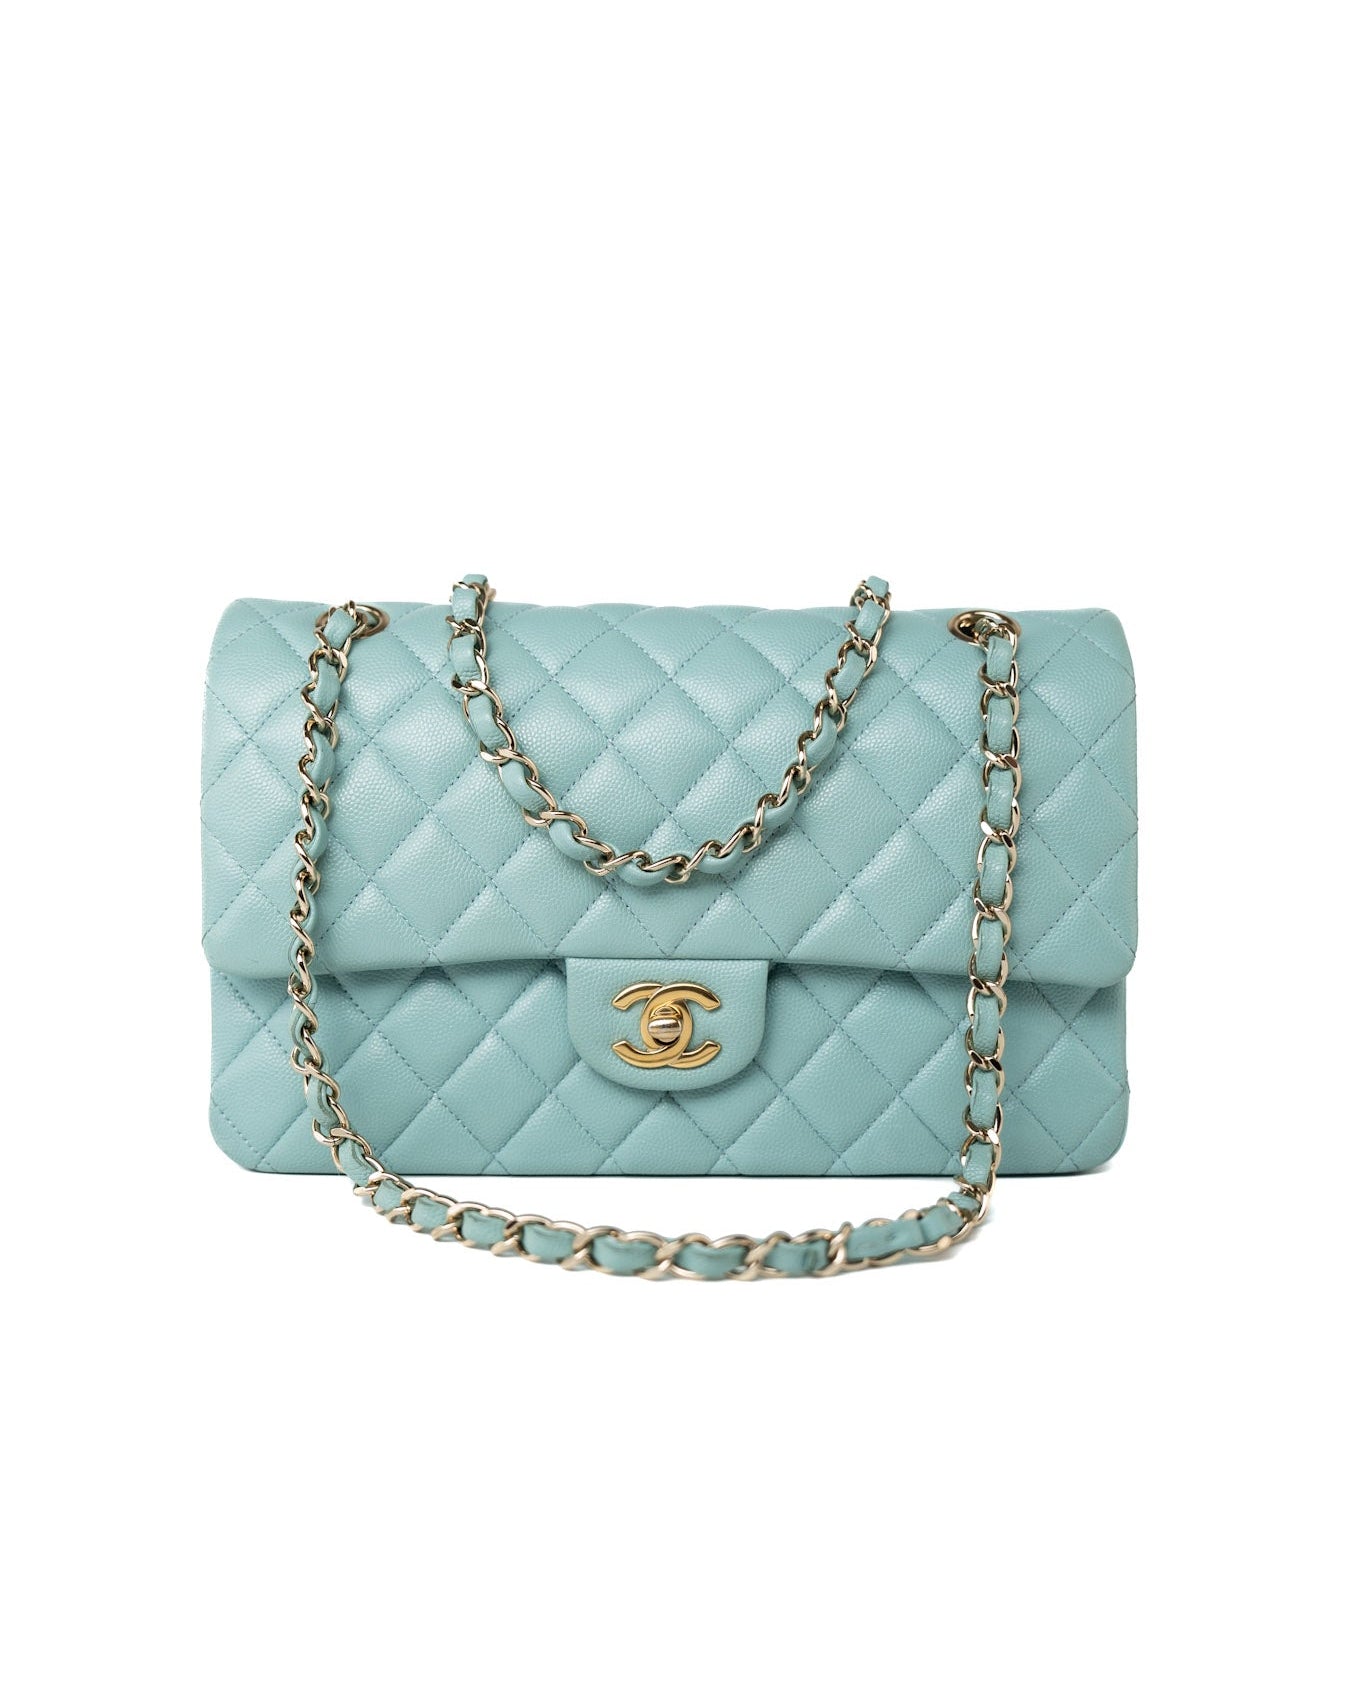 CHANEL Handbag 19c Tiffany Blue Caviar Quilted Classic Flap Light Gold Hardware - Redeluxe